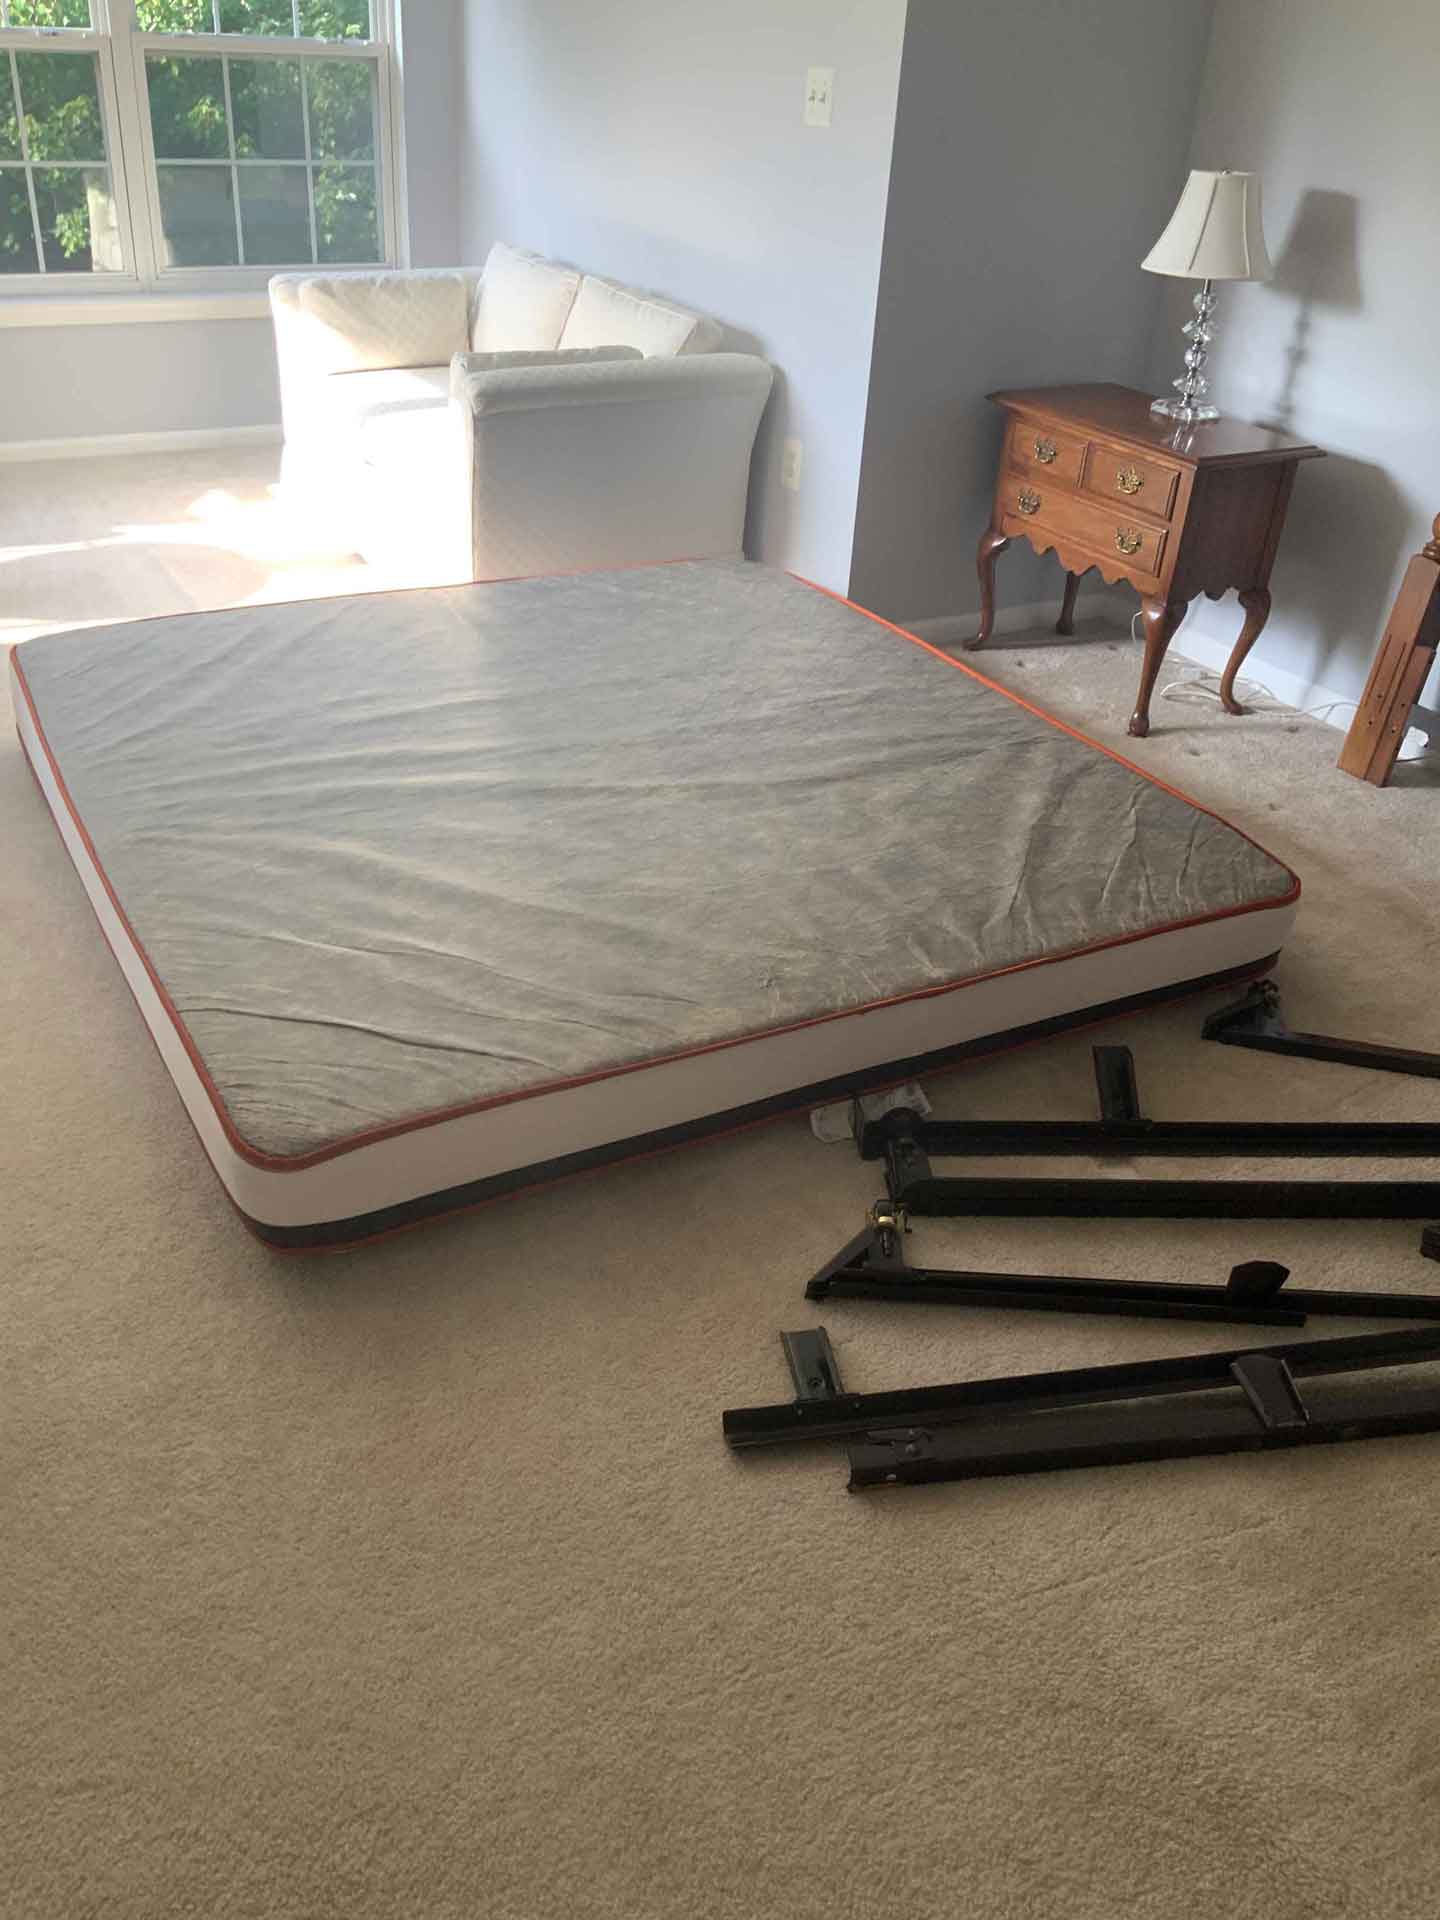 Mattress and dissembled bed frame